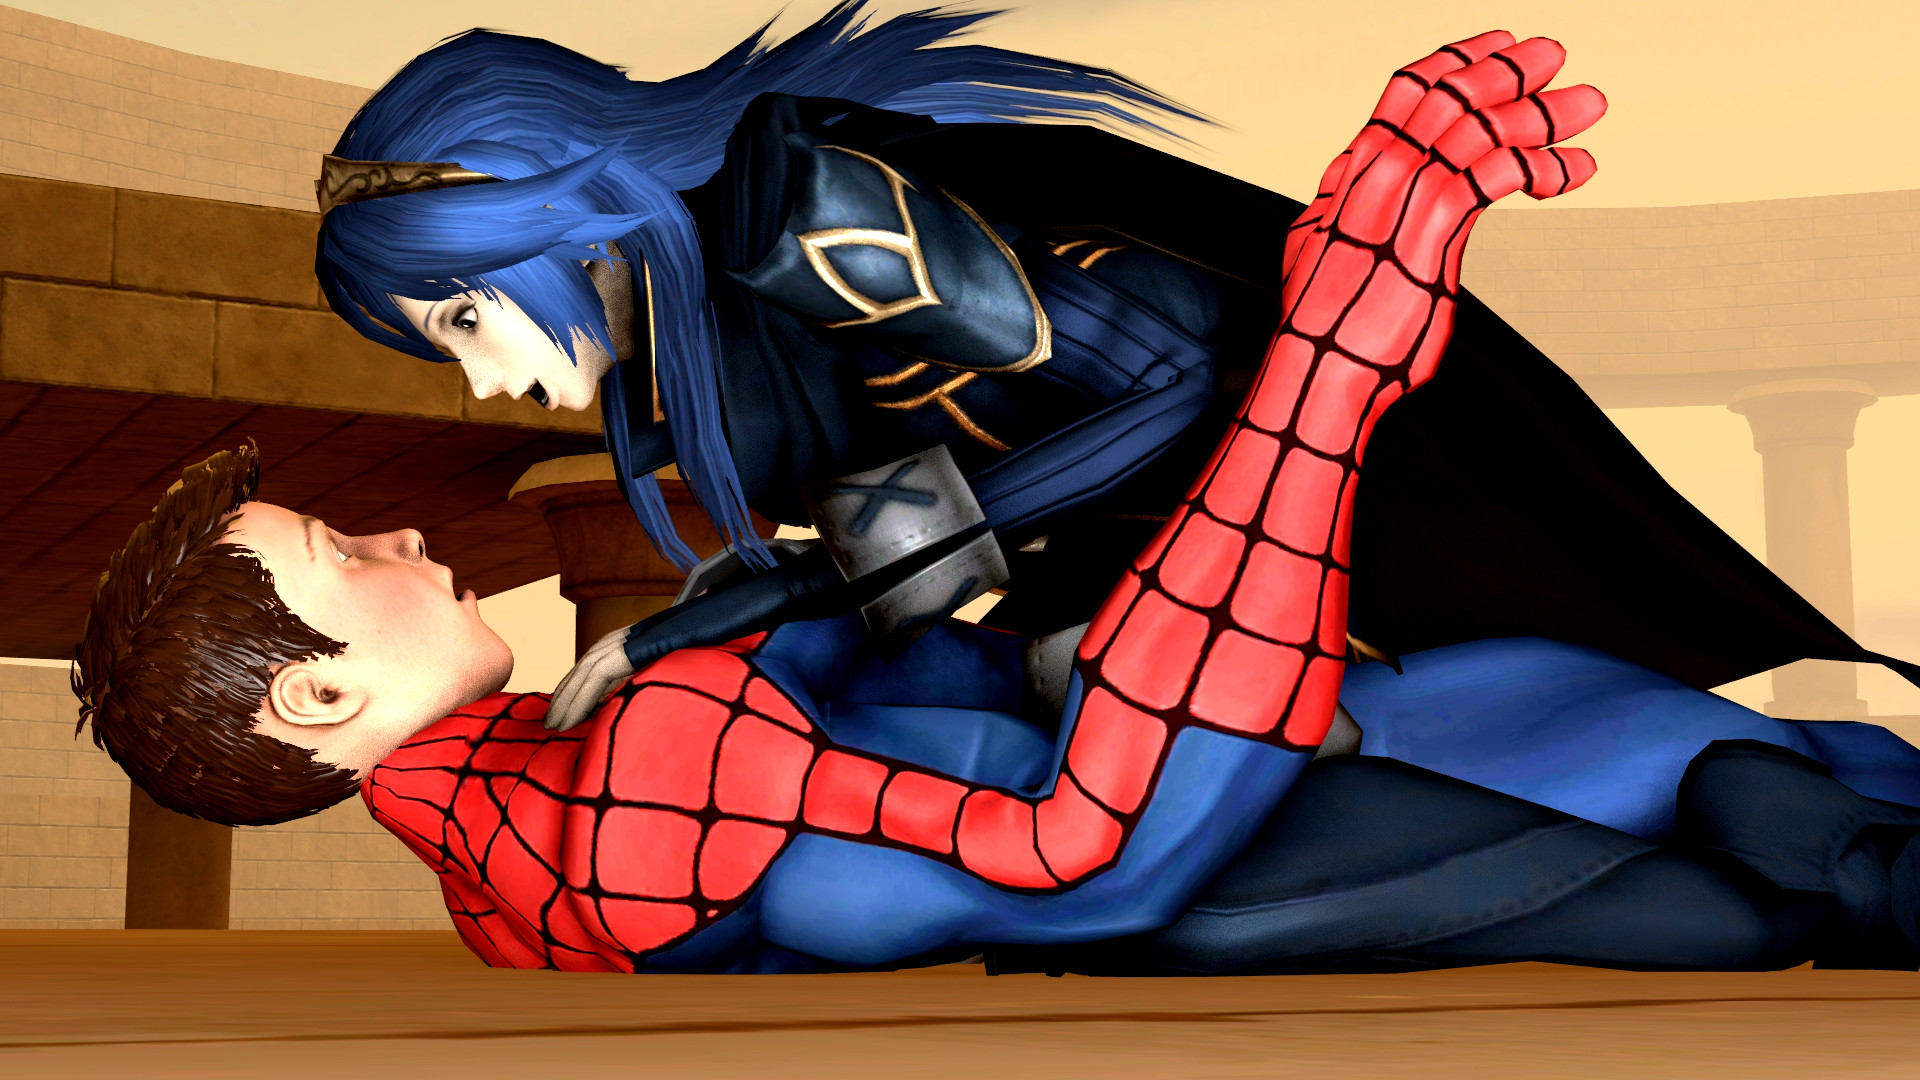 1920x1080 ... Lucina and Spider-Man: where are your going cutie? by kongzillarex619